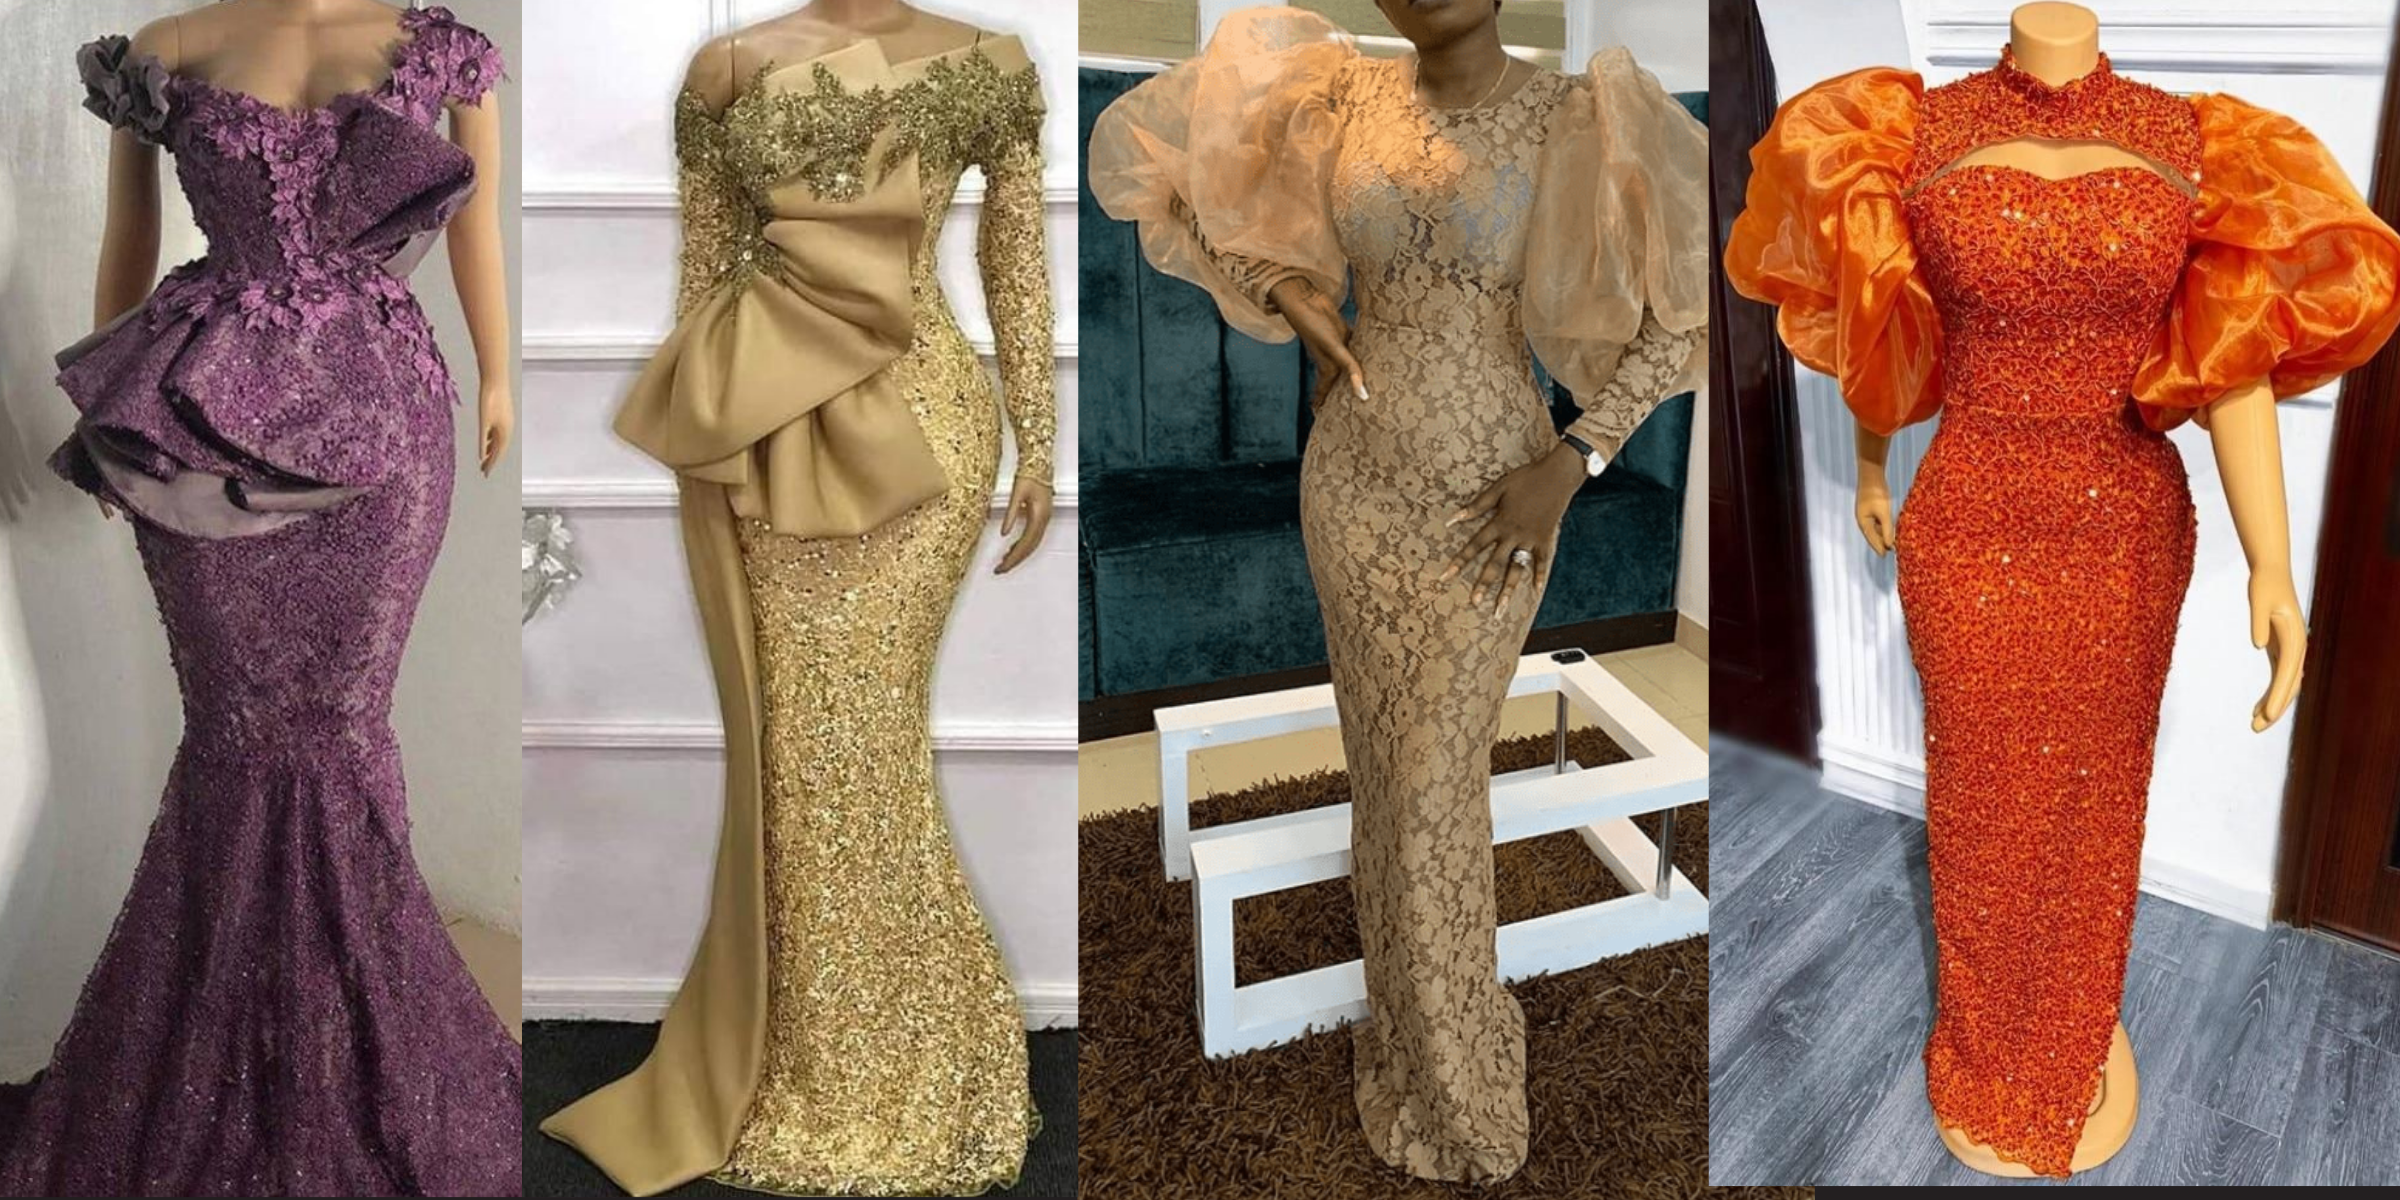 Aso Ebi: A means to exploit or support?